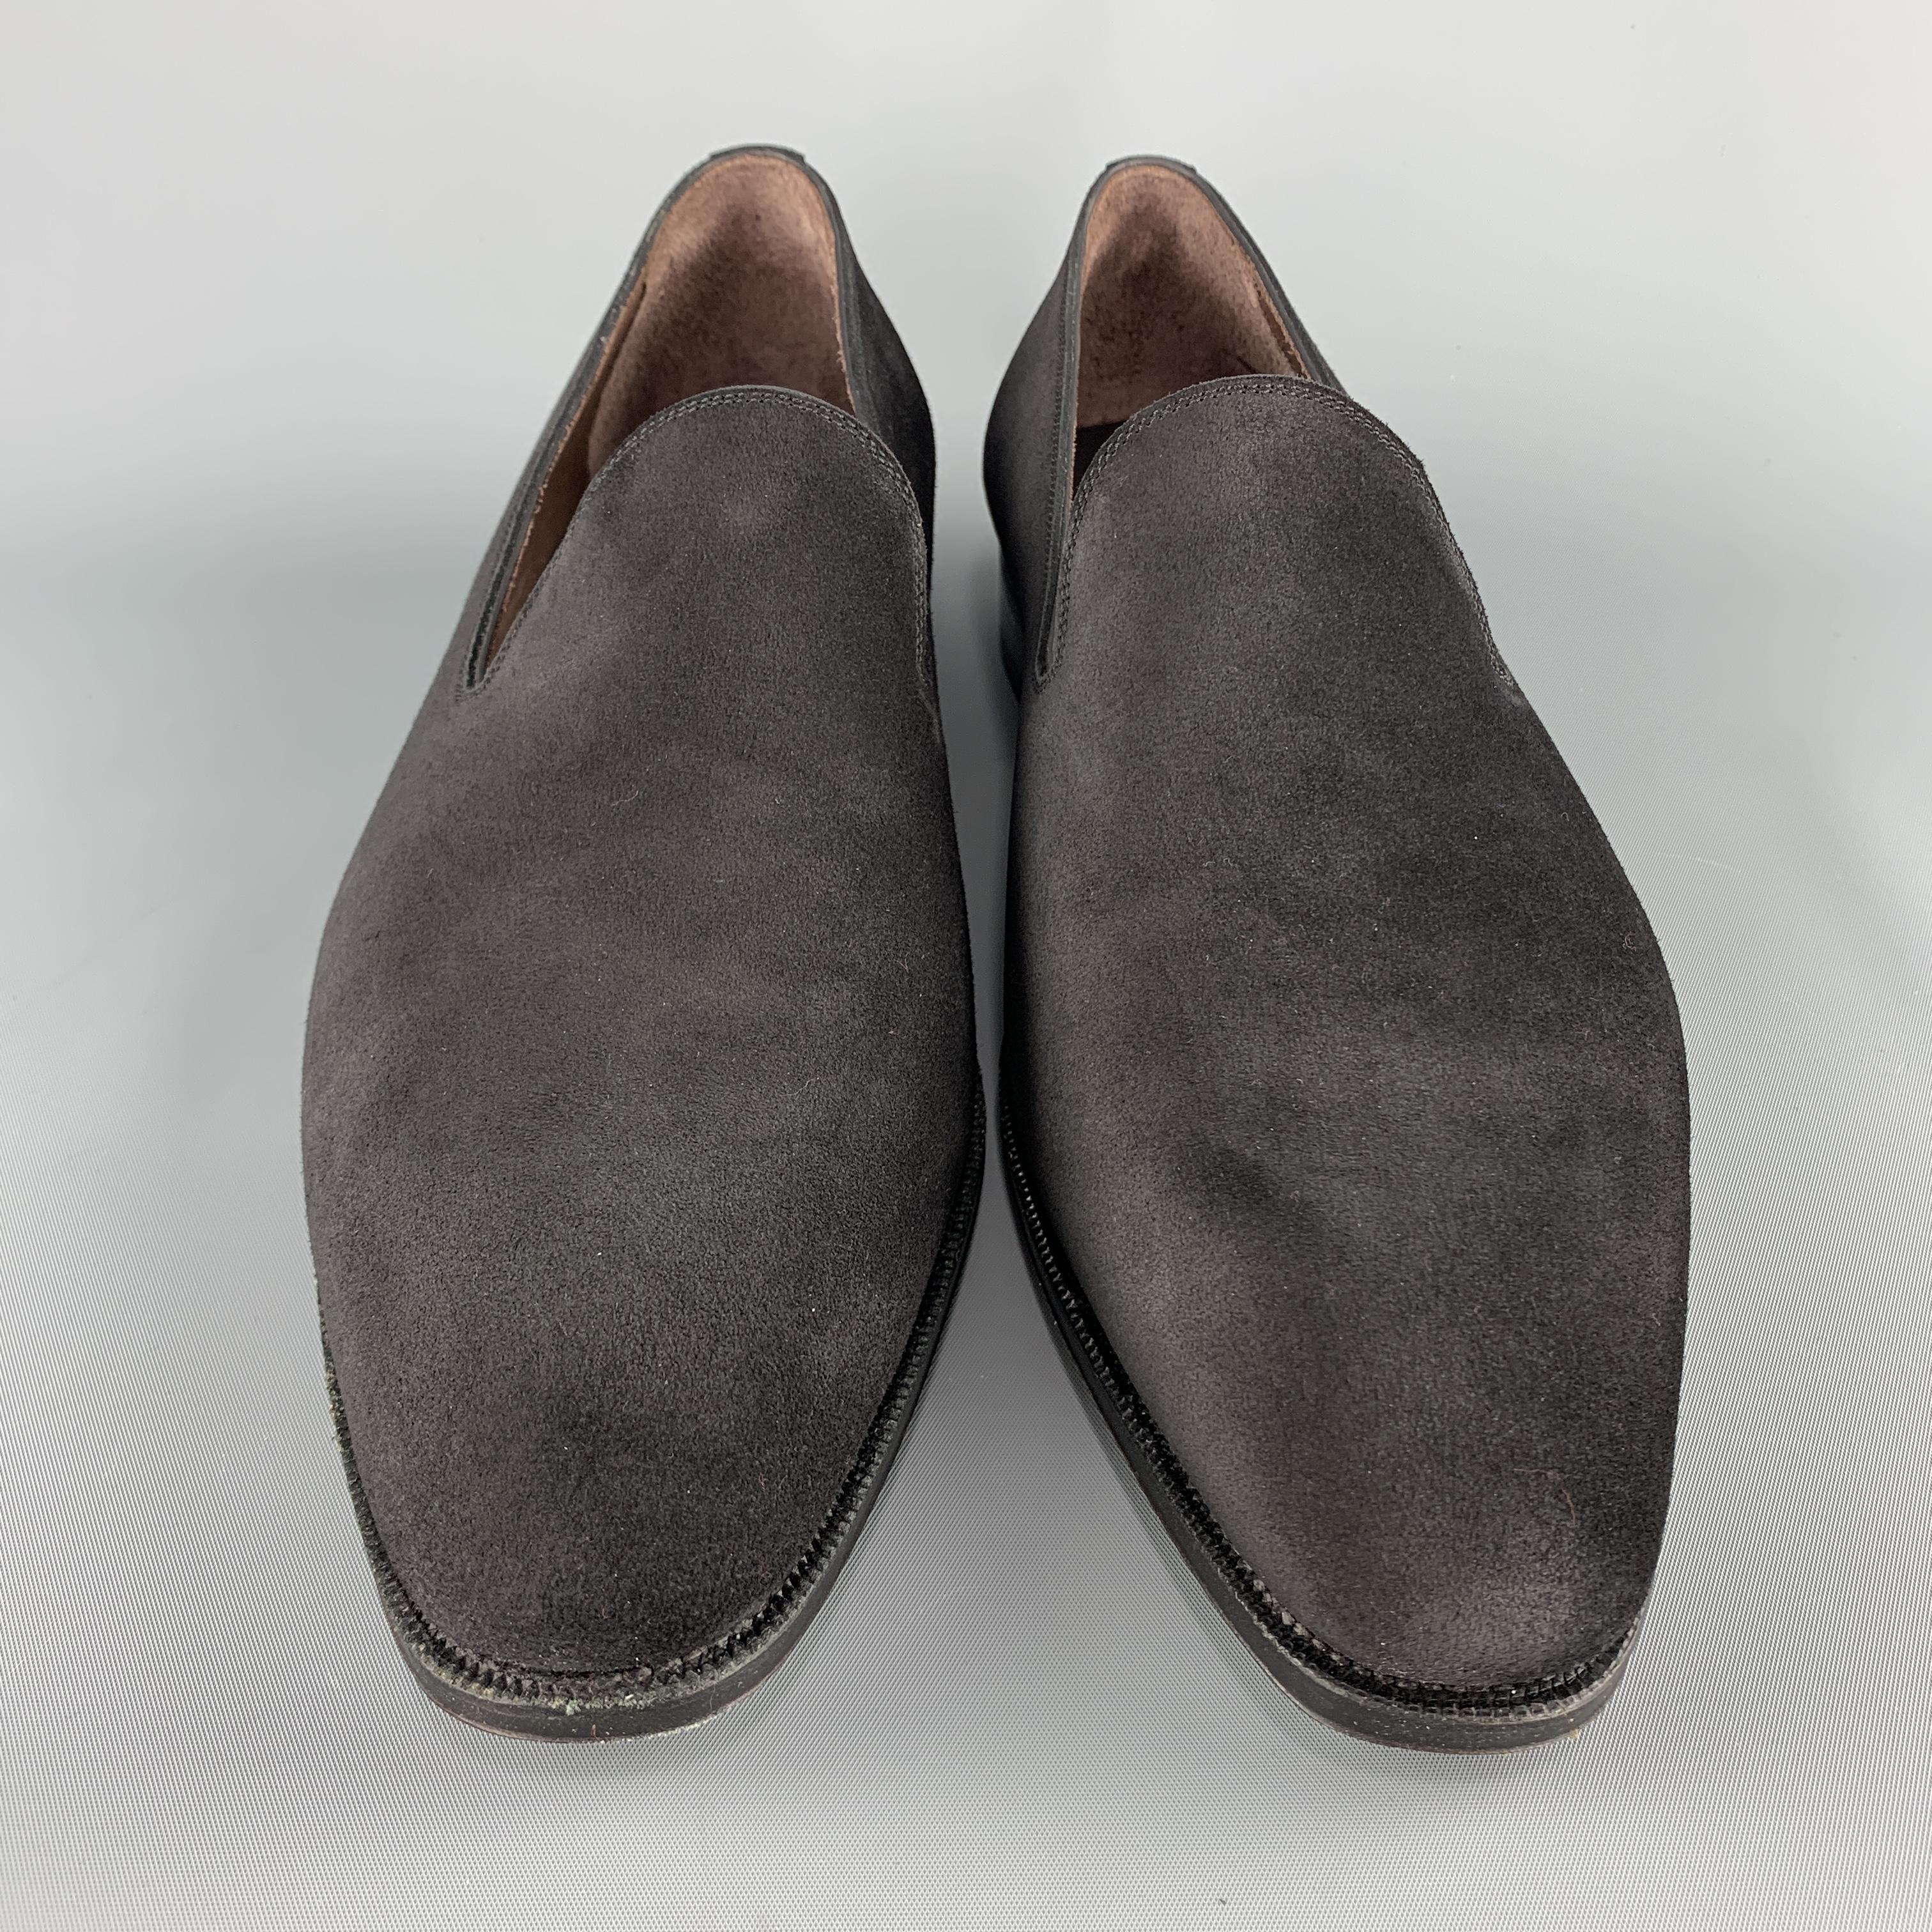 CARMINA dress loafers come in black suede with a tapered toe. Made in Spain.

New with Box.
Marked: UK 9.5

Outsole: 12 x 4.25 in.